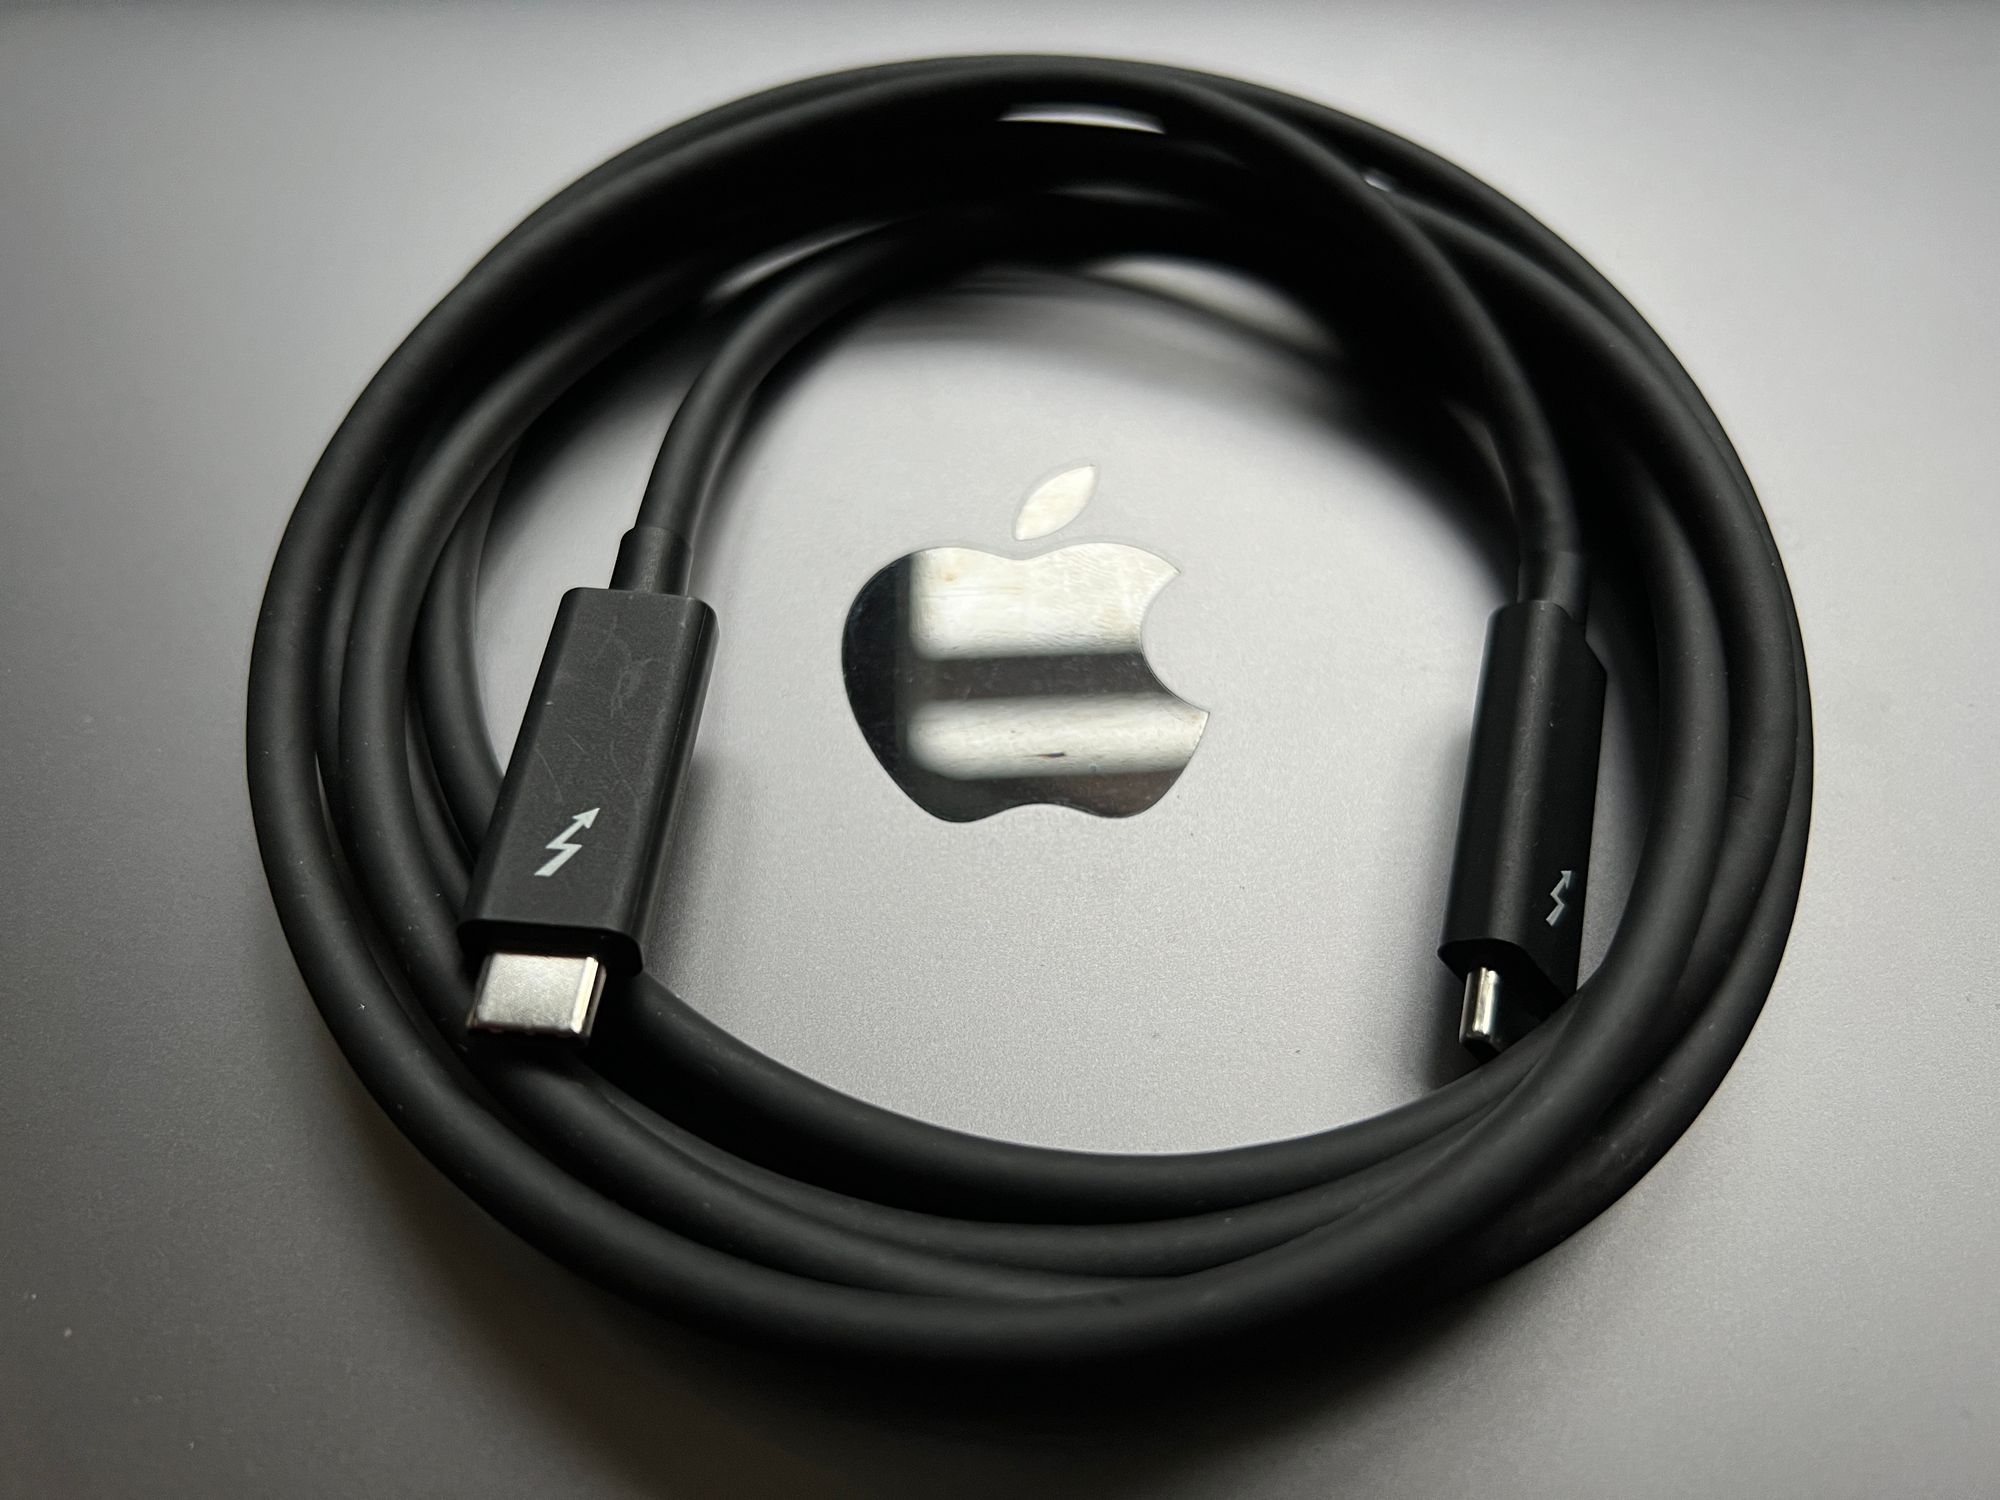 Thunderbolt 4 certified cable for the data transfer